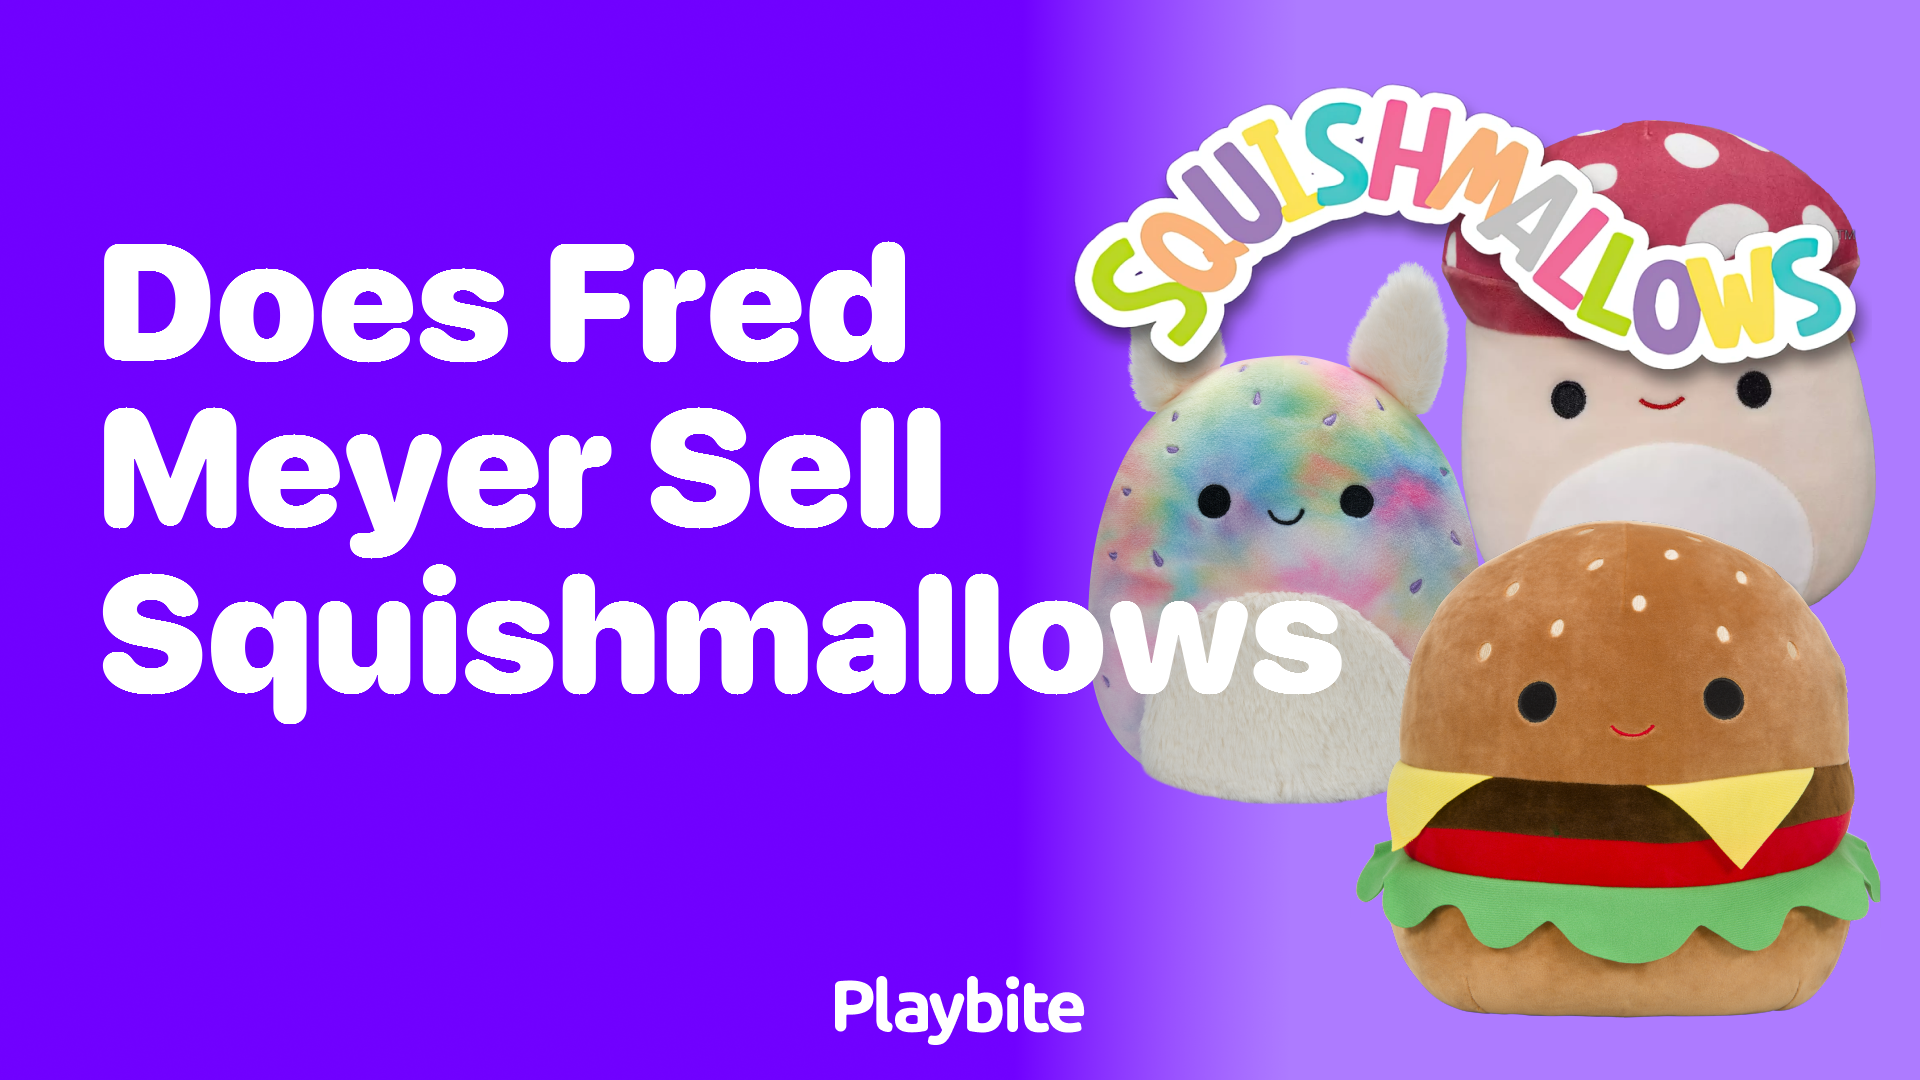 Does Fred Meyer Sell Squishmallows? Find Out Here!